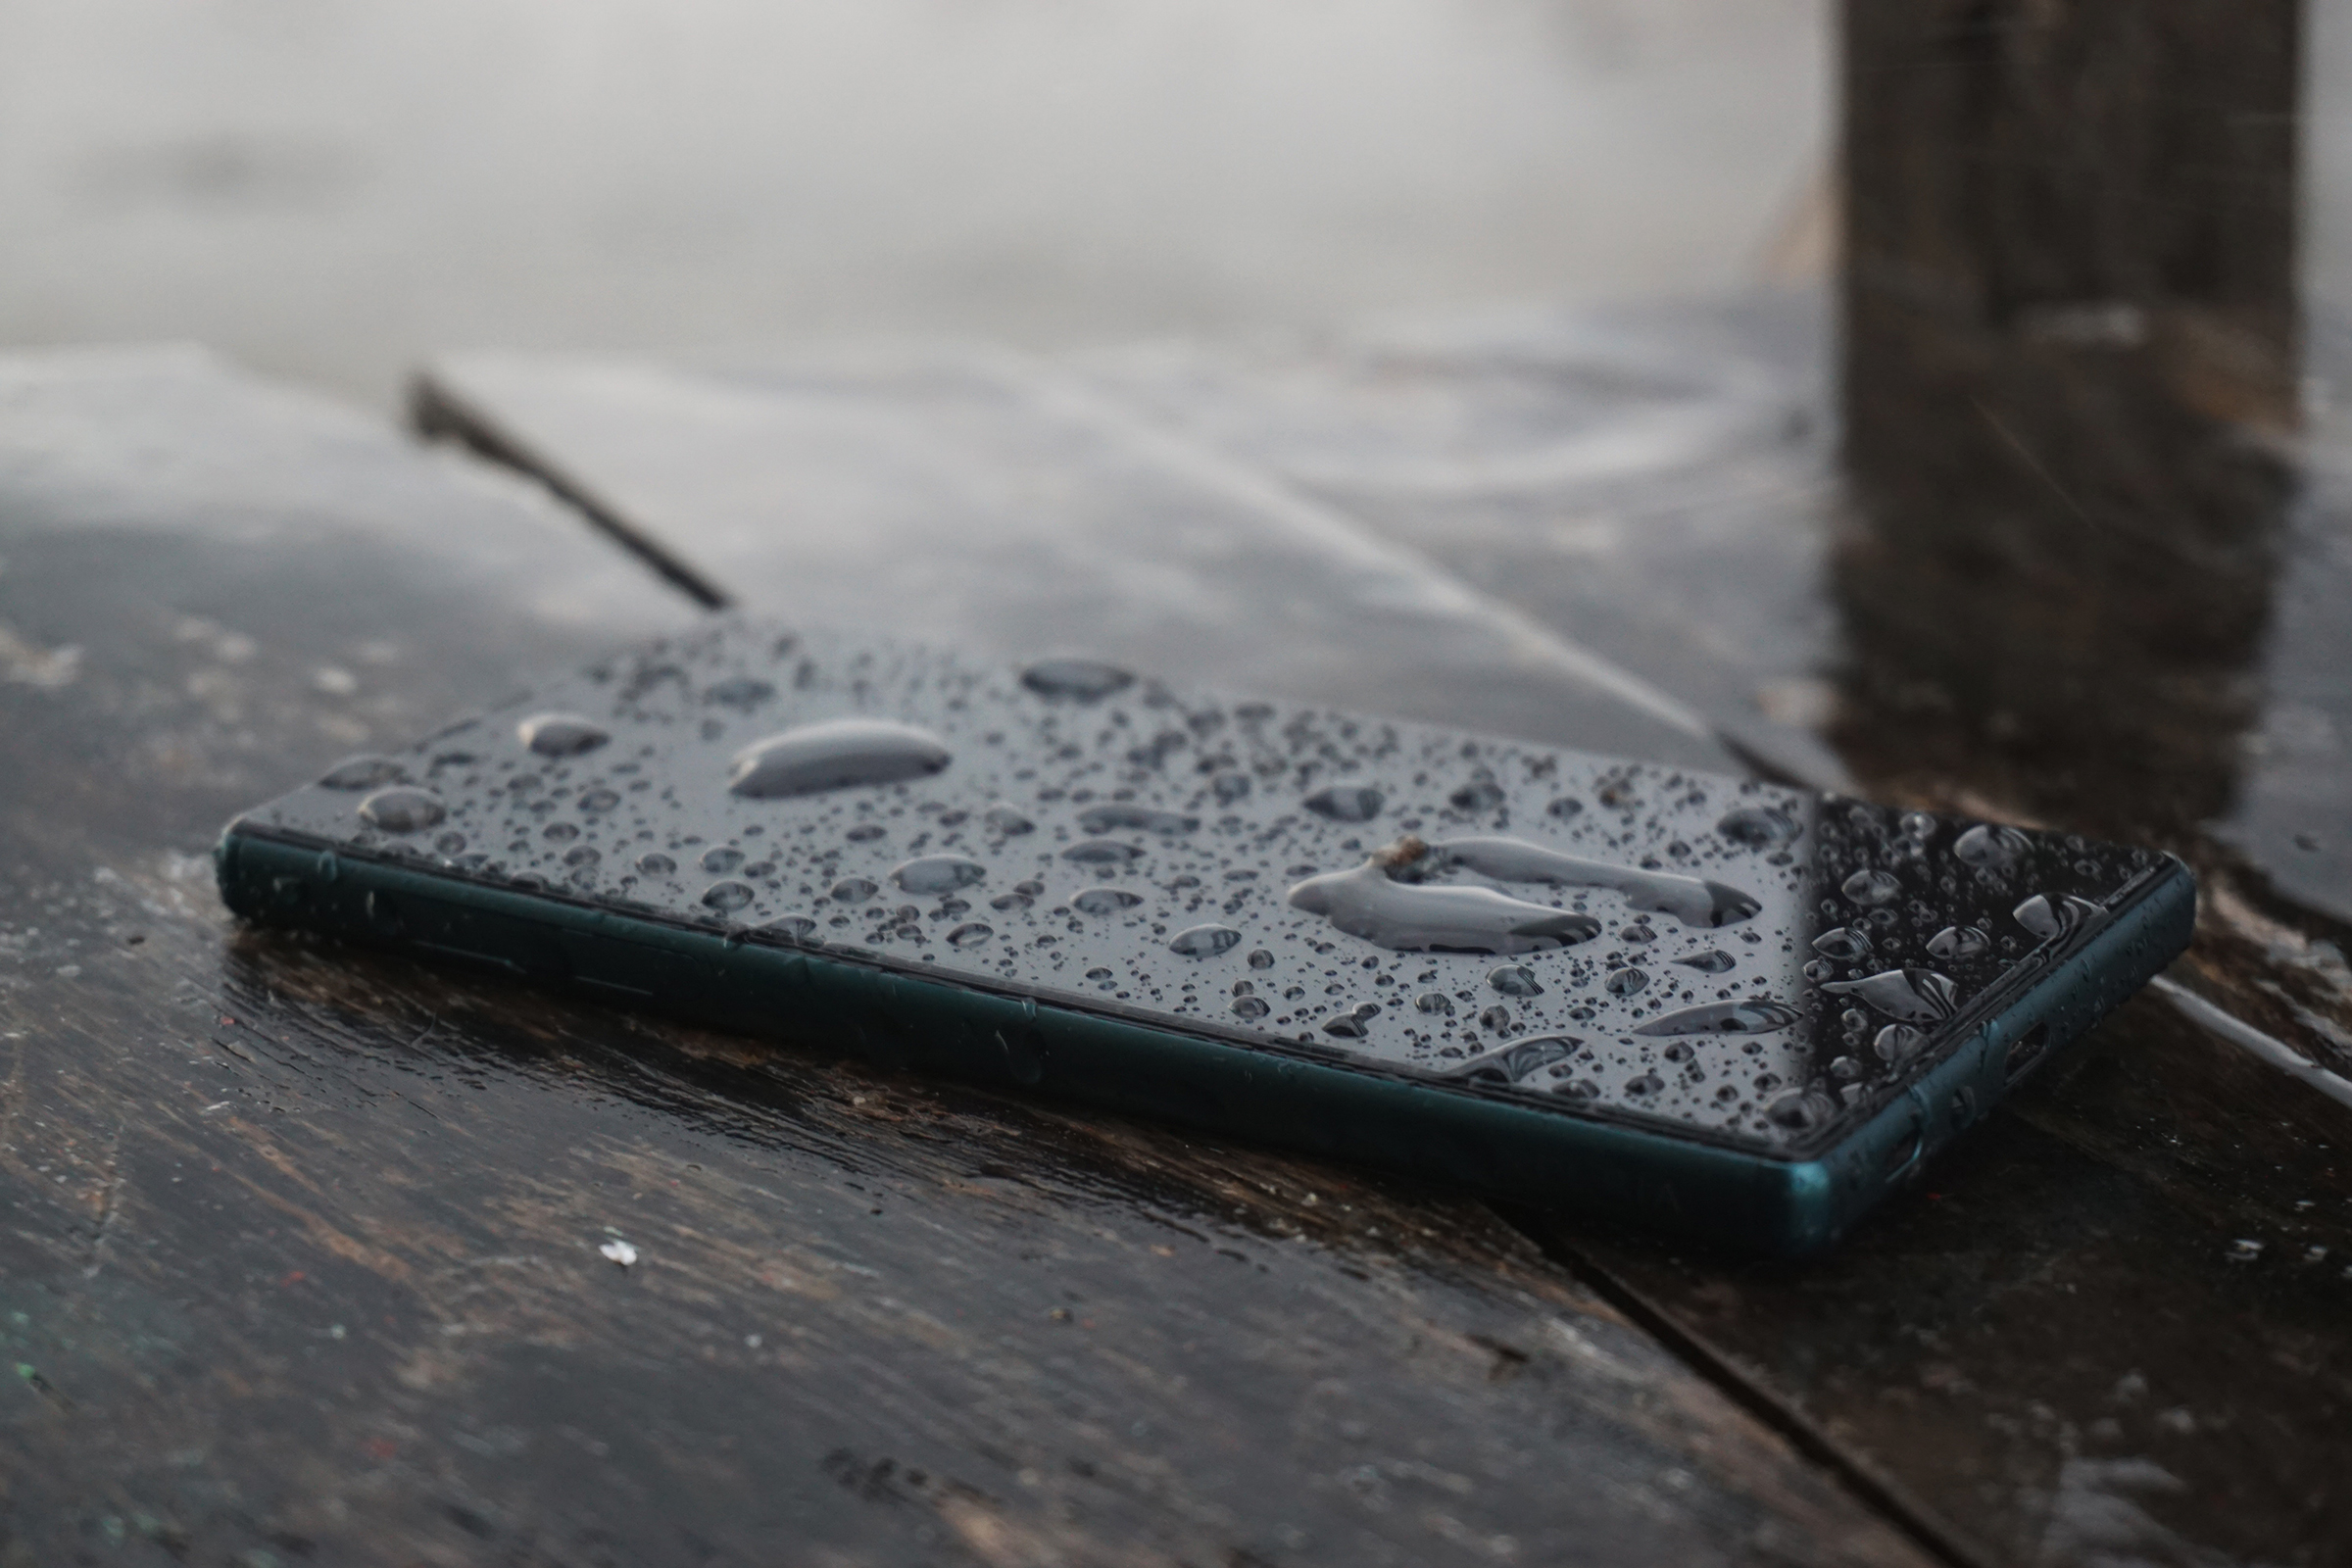 Guide: How to Tell if Your Phone has Water Damage